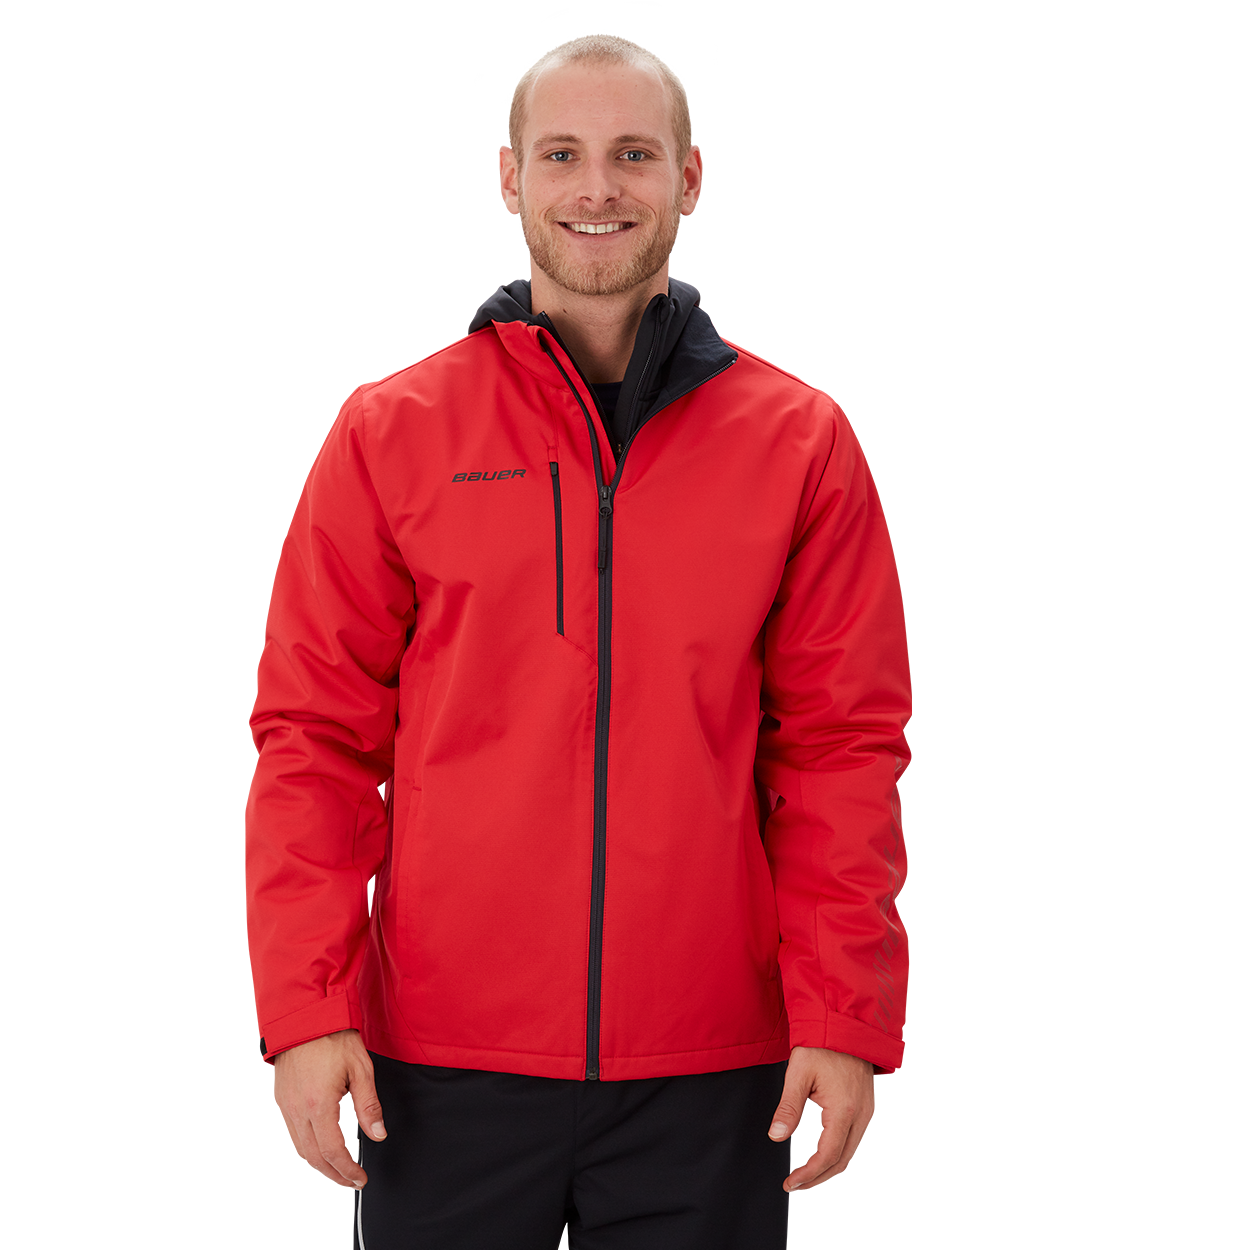 BAUER HOCKEY MIDWEIGHT JACKET YOUTH